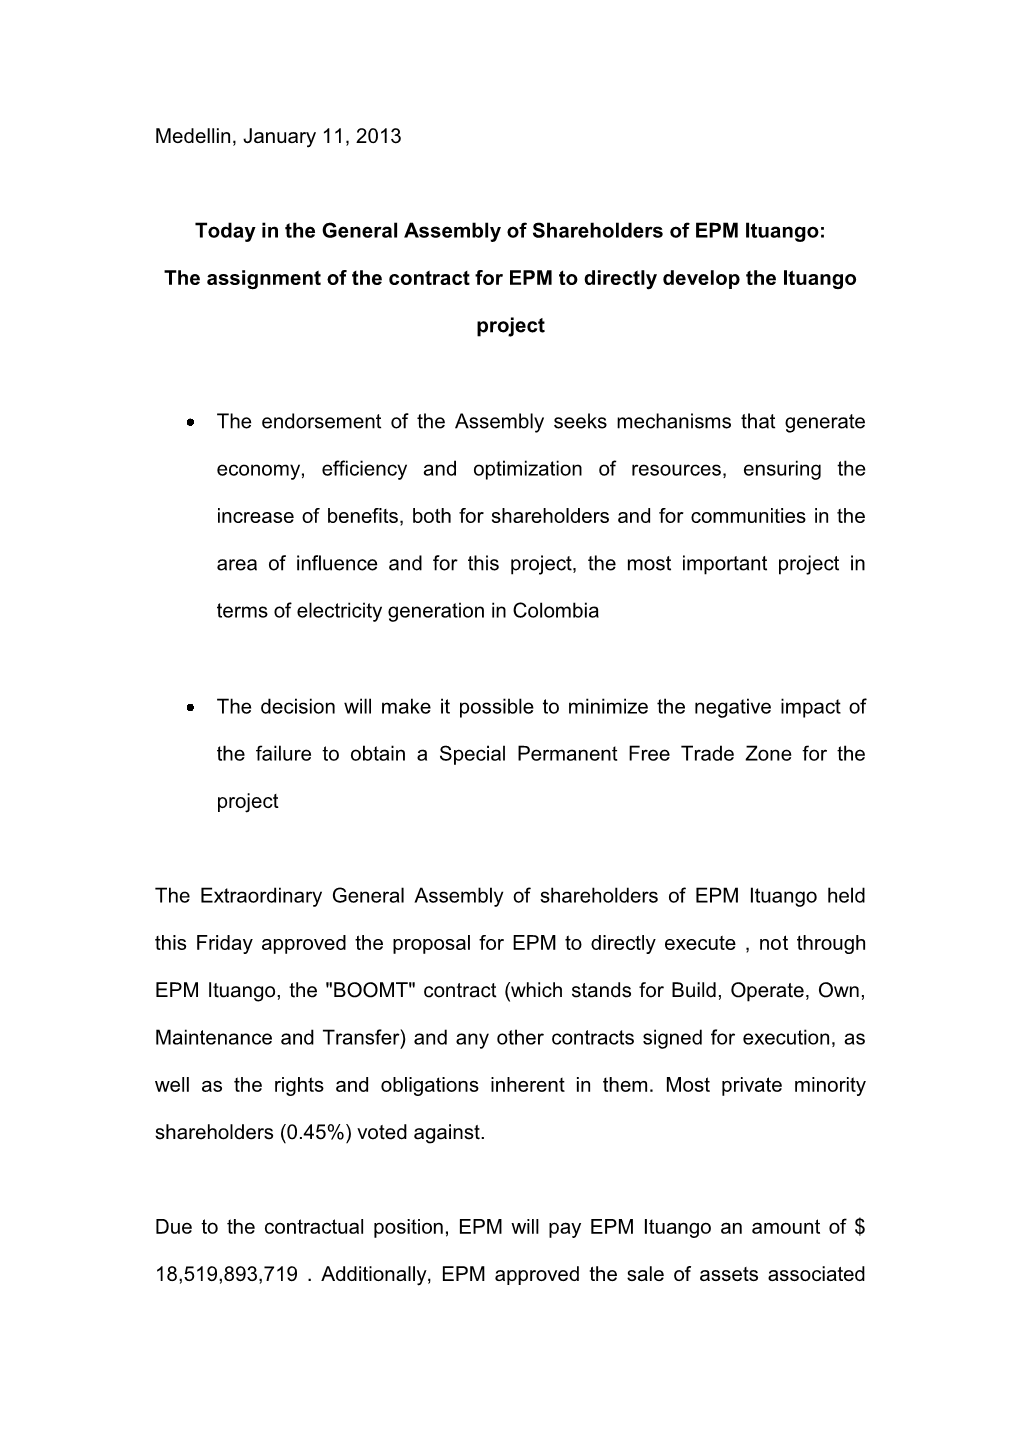 The Assignment of the Contract for EPM to Directly Develop the Ituango